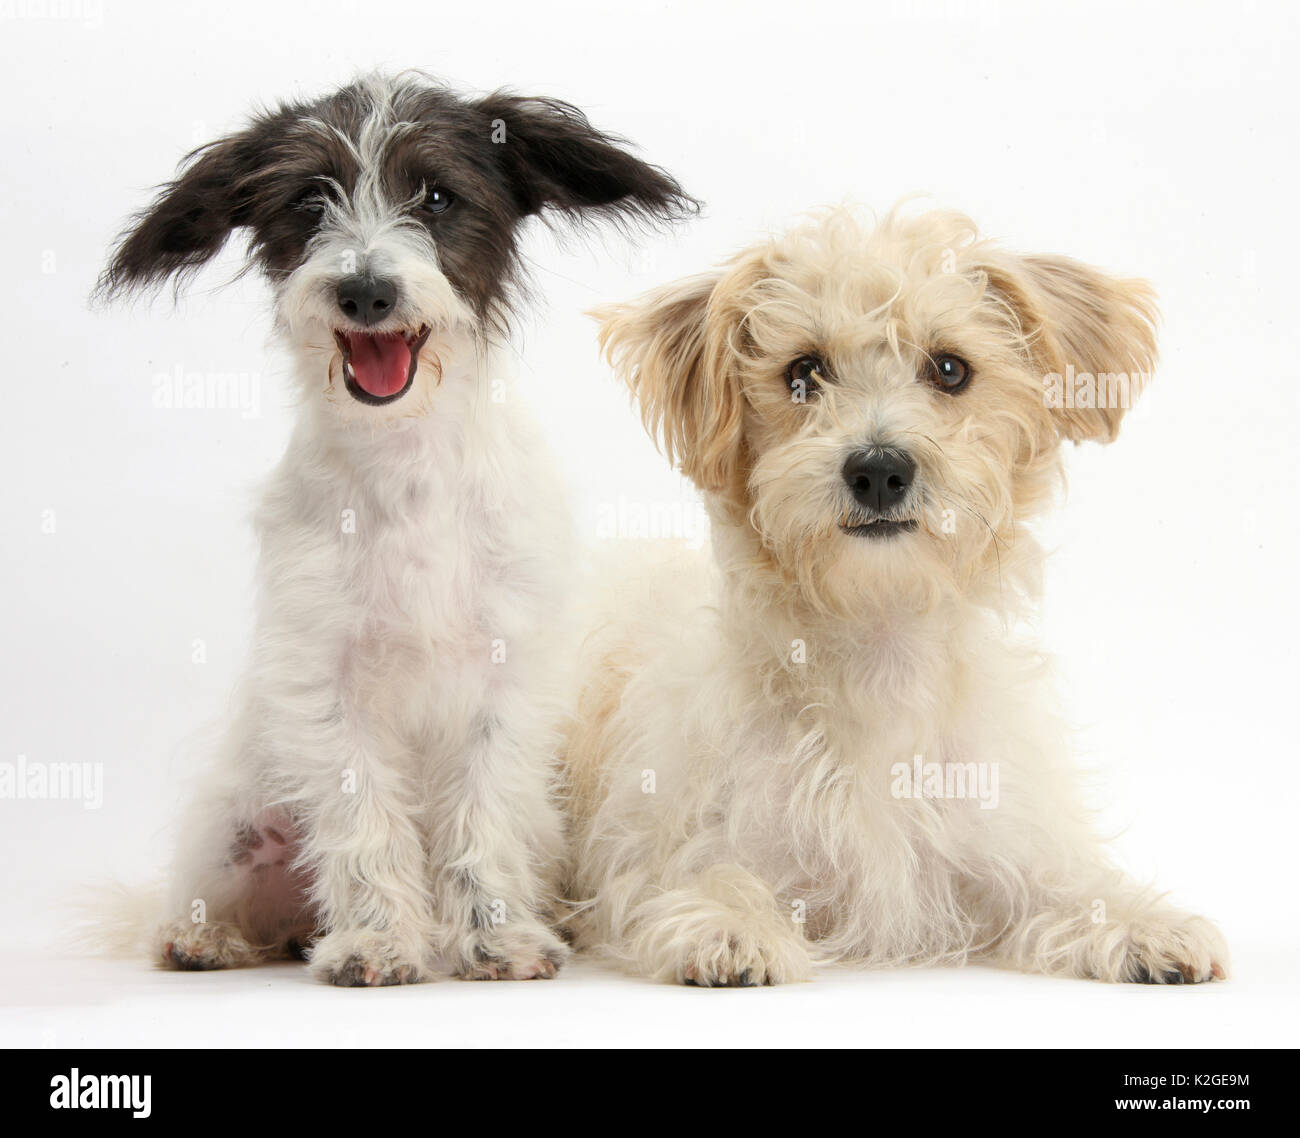 Black-and-white Jack-a-poo, Jack Russell cross Poodle puppy, age 4 months with Bichon Frise x Jack Russell. Stock Photo